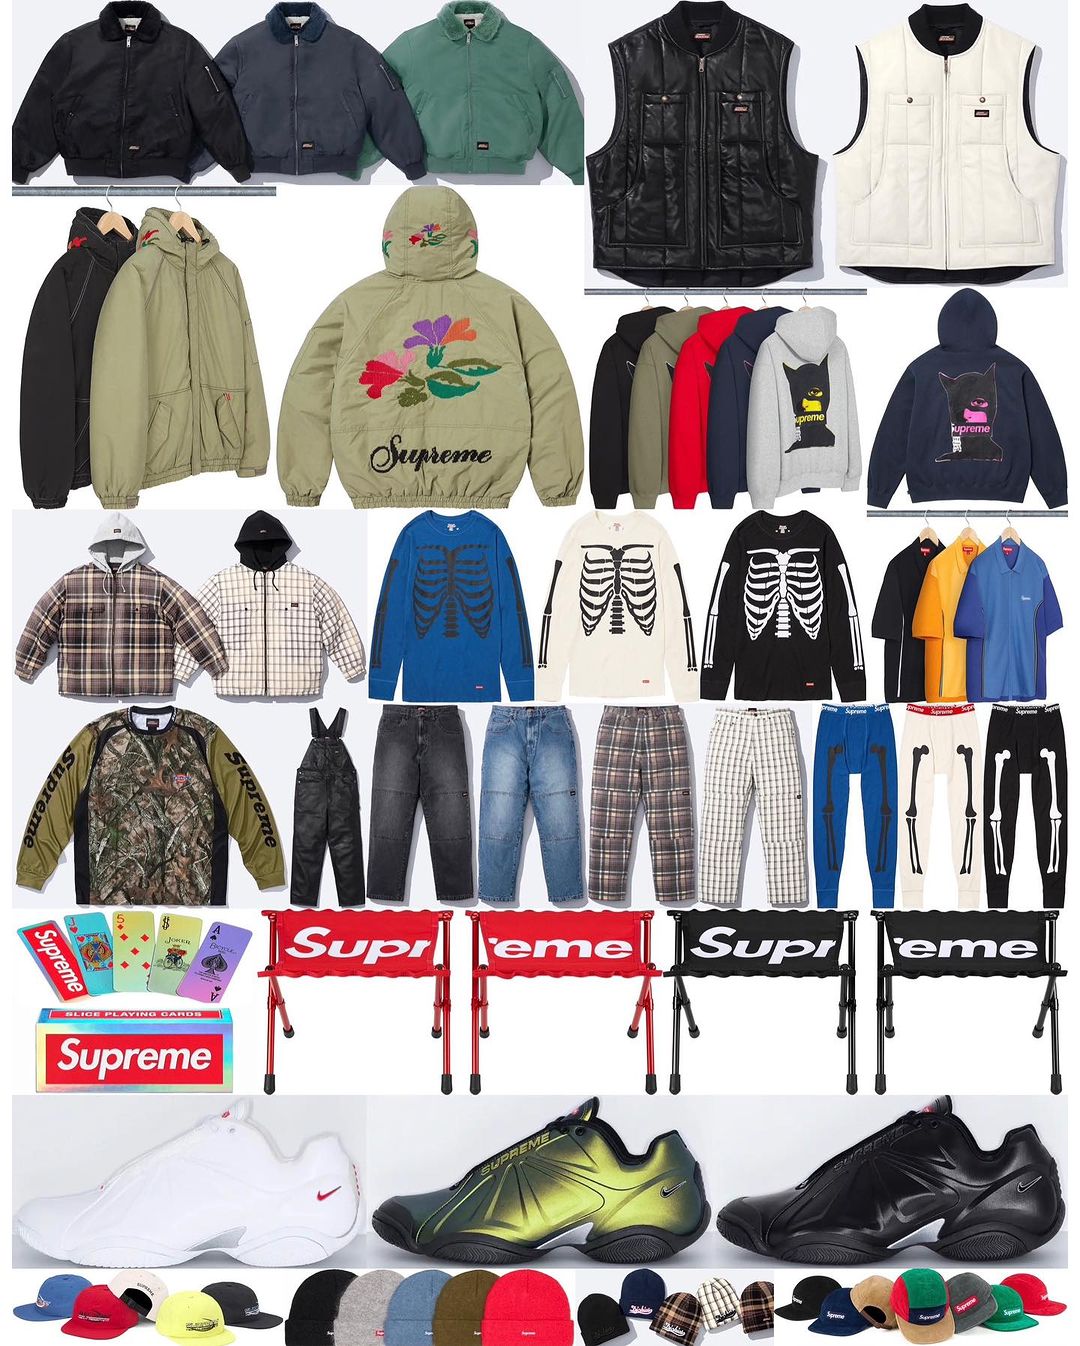 Supreme 公式通販サイトで10月21日 Week9に発売予定の23FW 23AW 新作